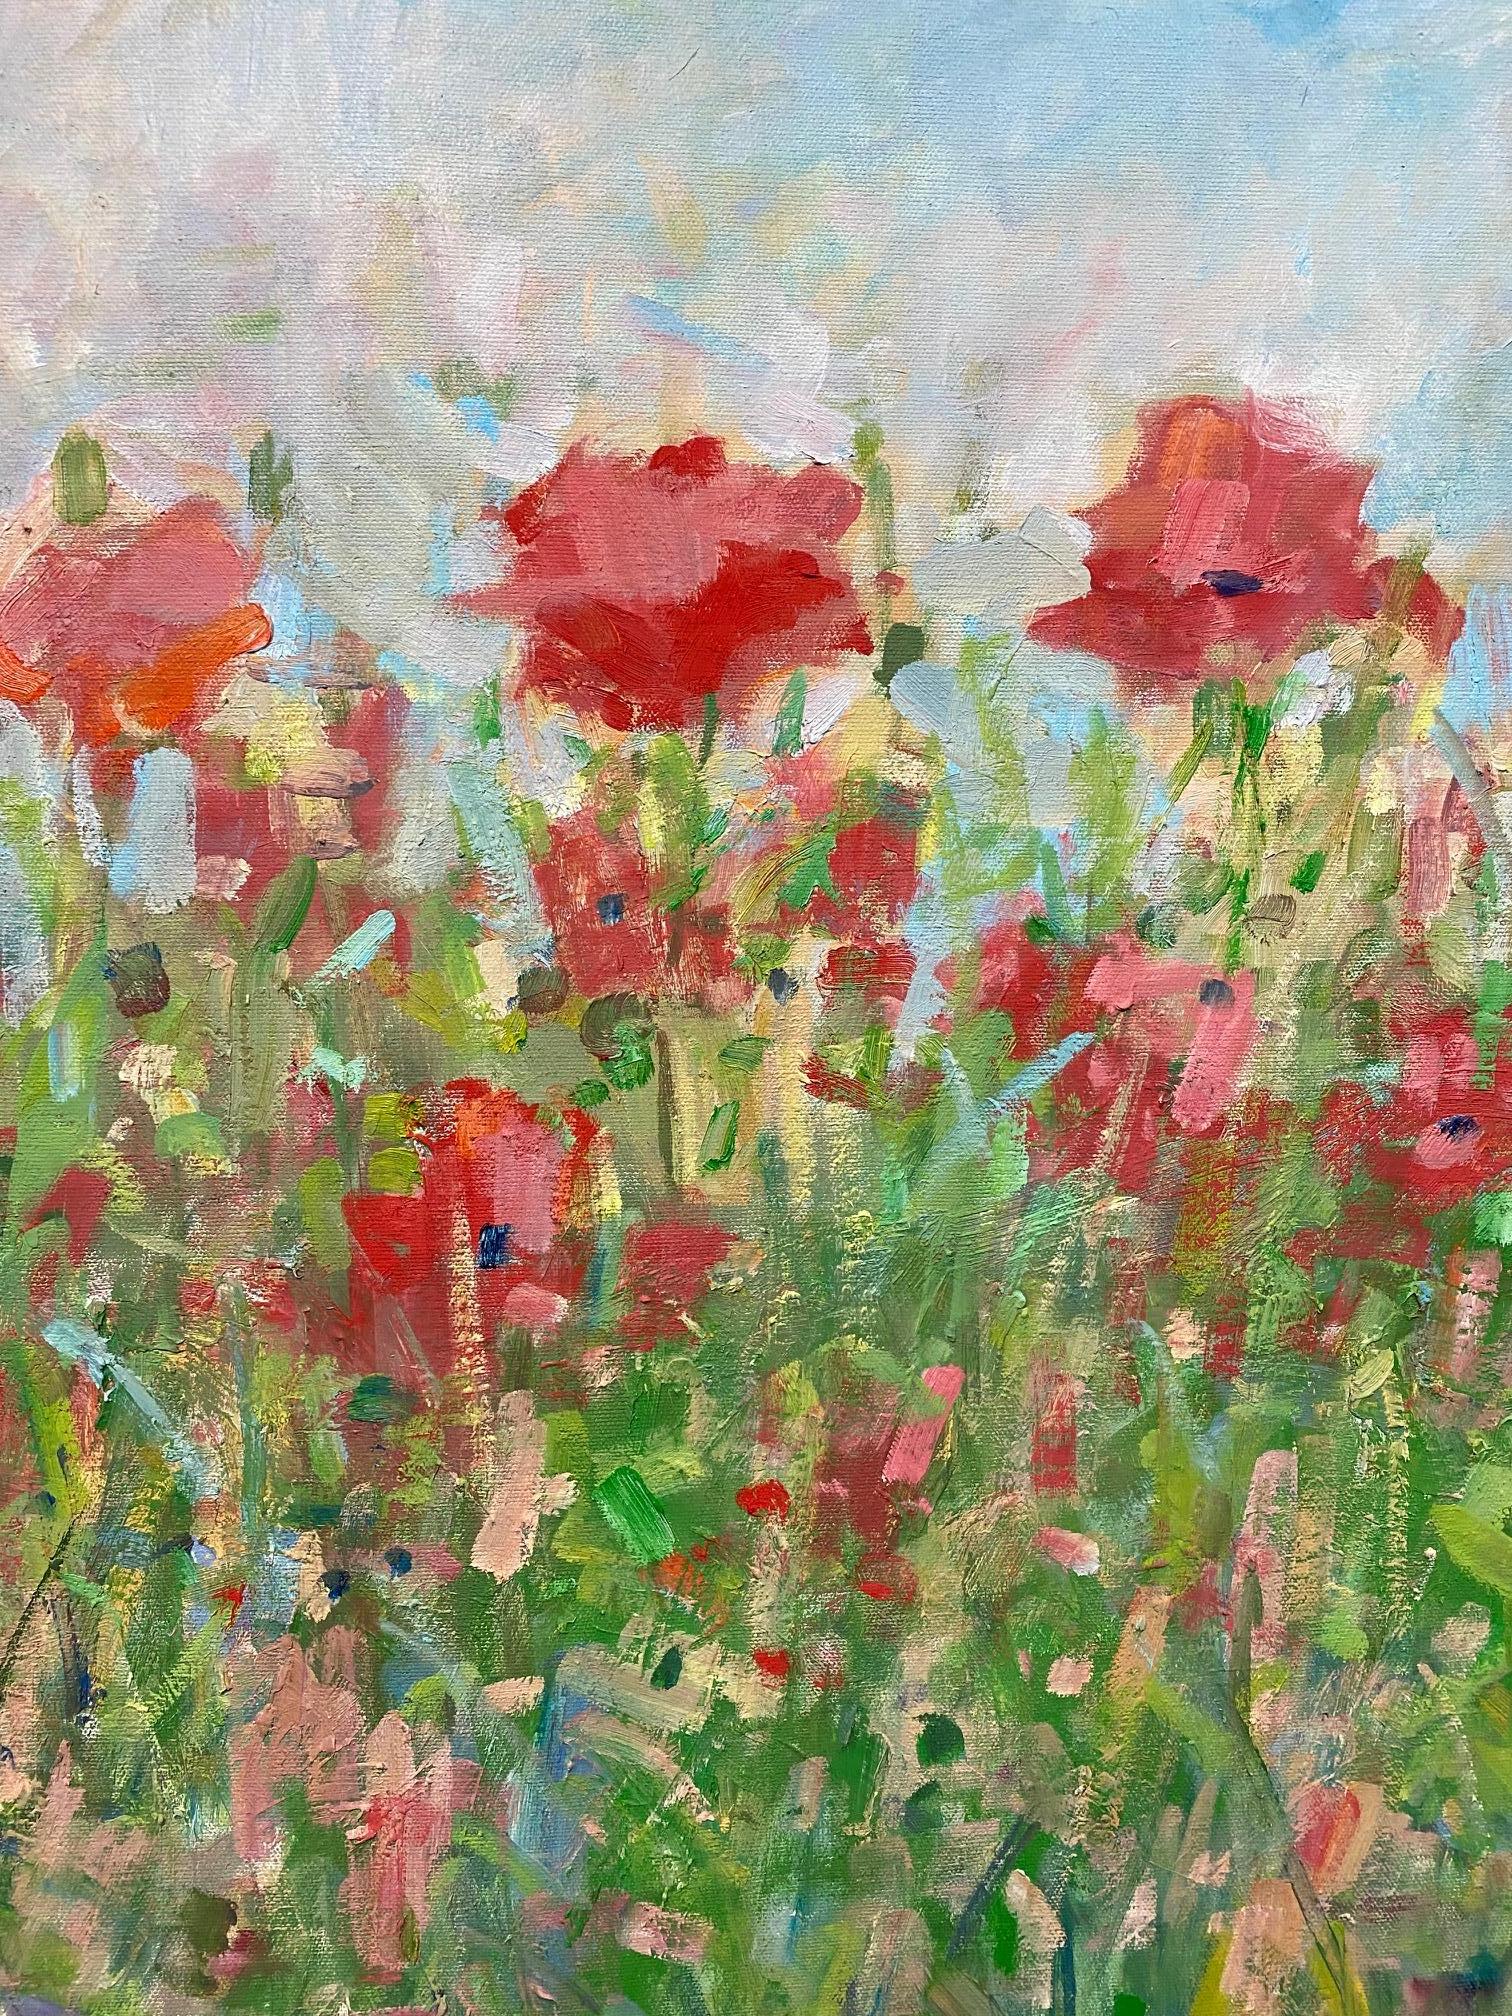 Field of Poppies, original 29x47 contemporary floral landscape - Contemporary Painting by Bart DeCeglie